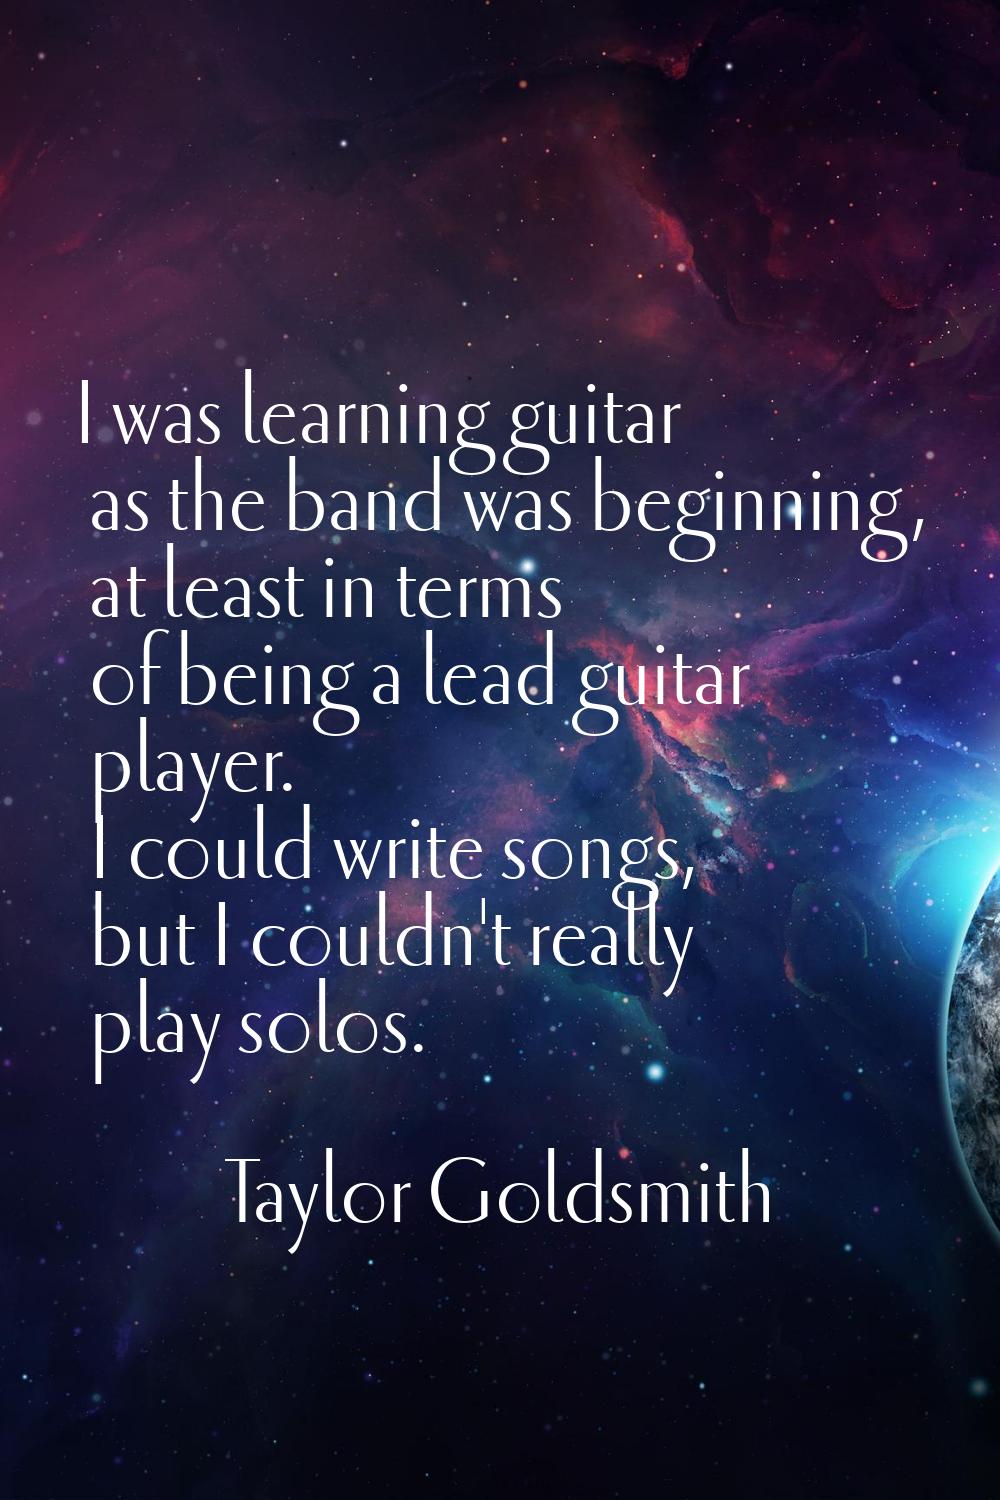 I was learning guitar as the band was beginning, at least in terms of being a lead guitar player. I